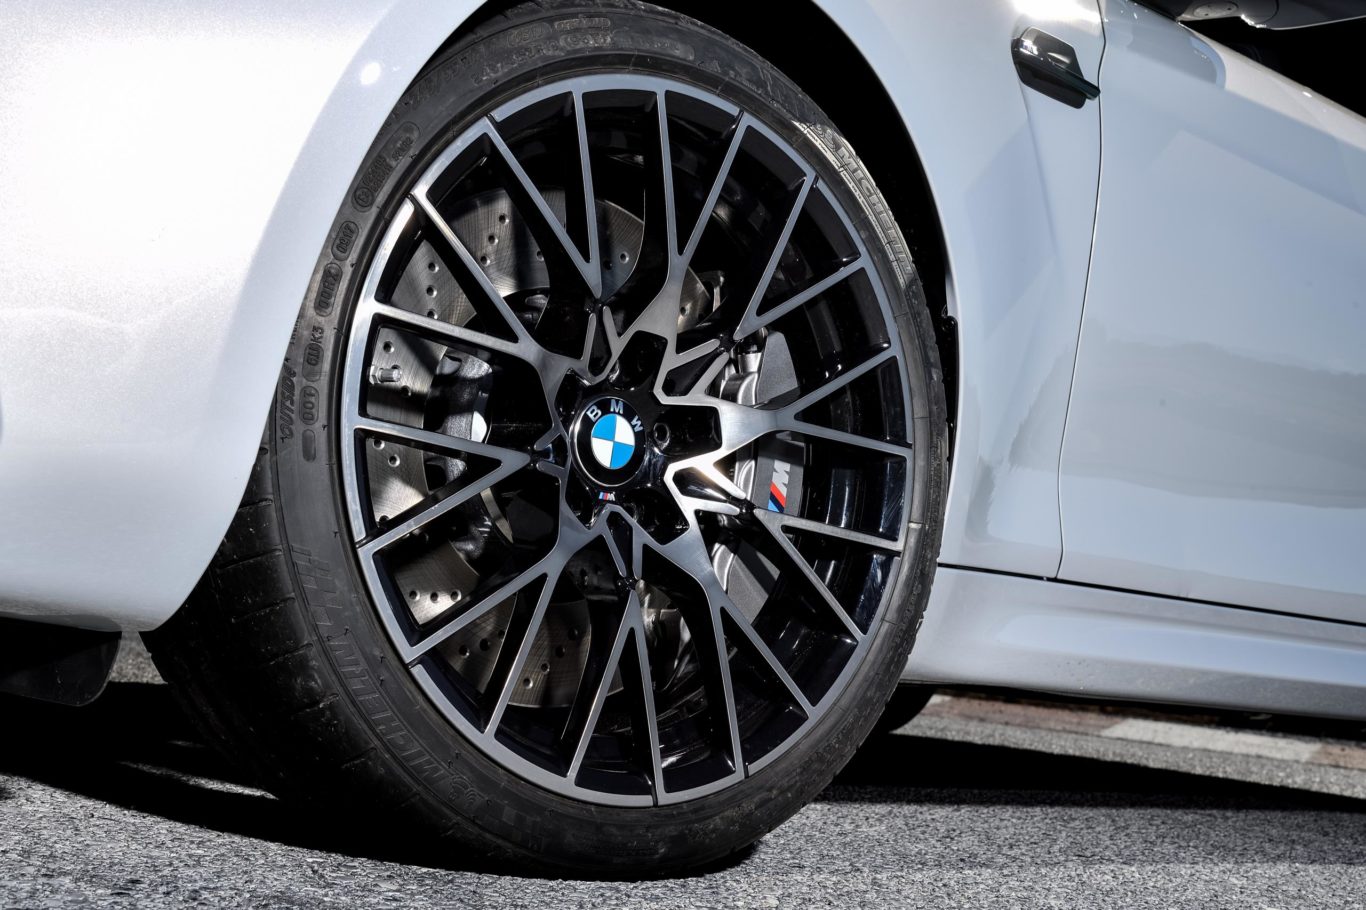 Large alloy wheels sit in front of M-spec brakes